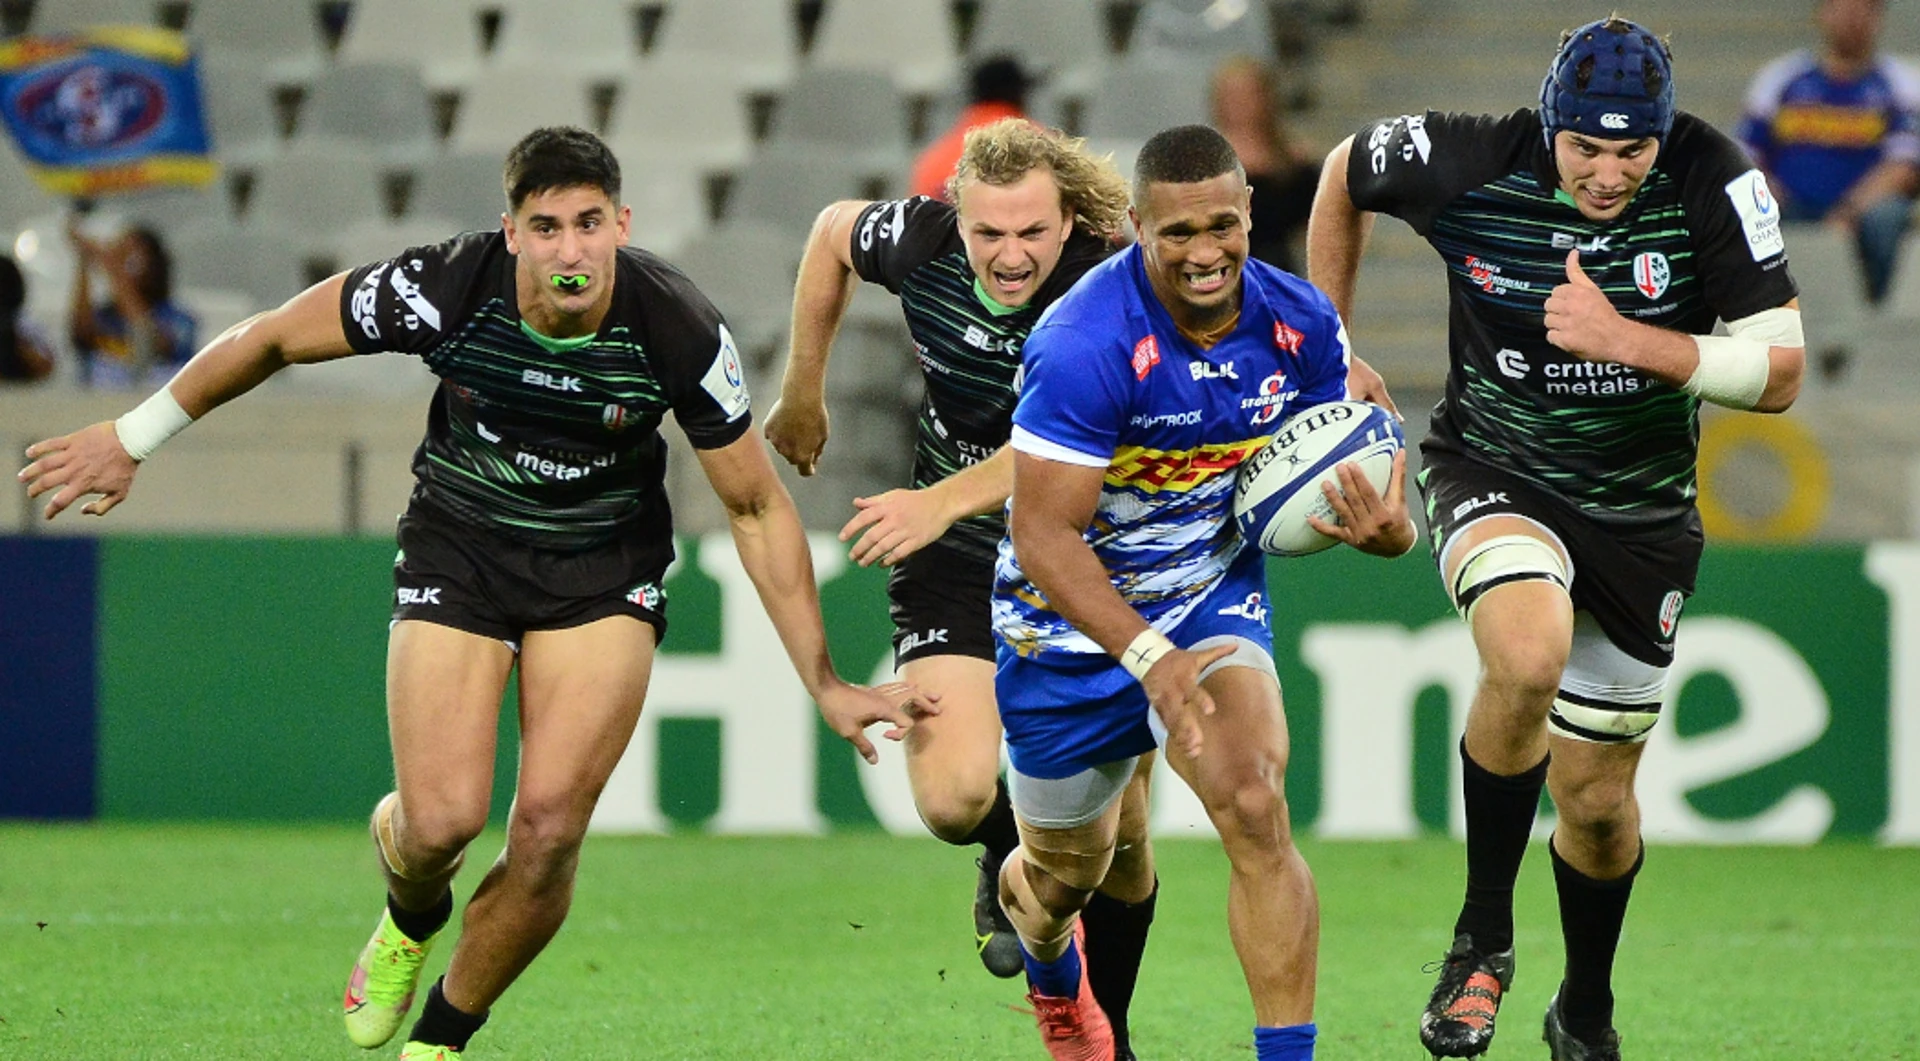 Pokomela try means it’s Stormers' mission accomplished